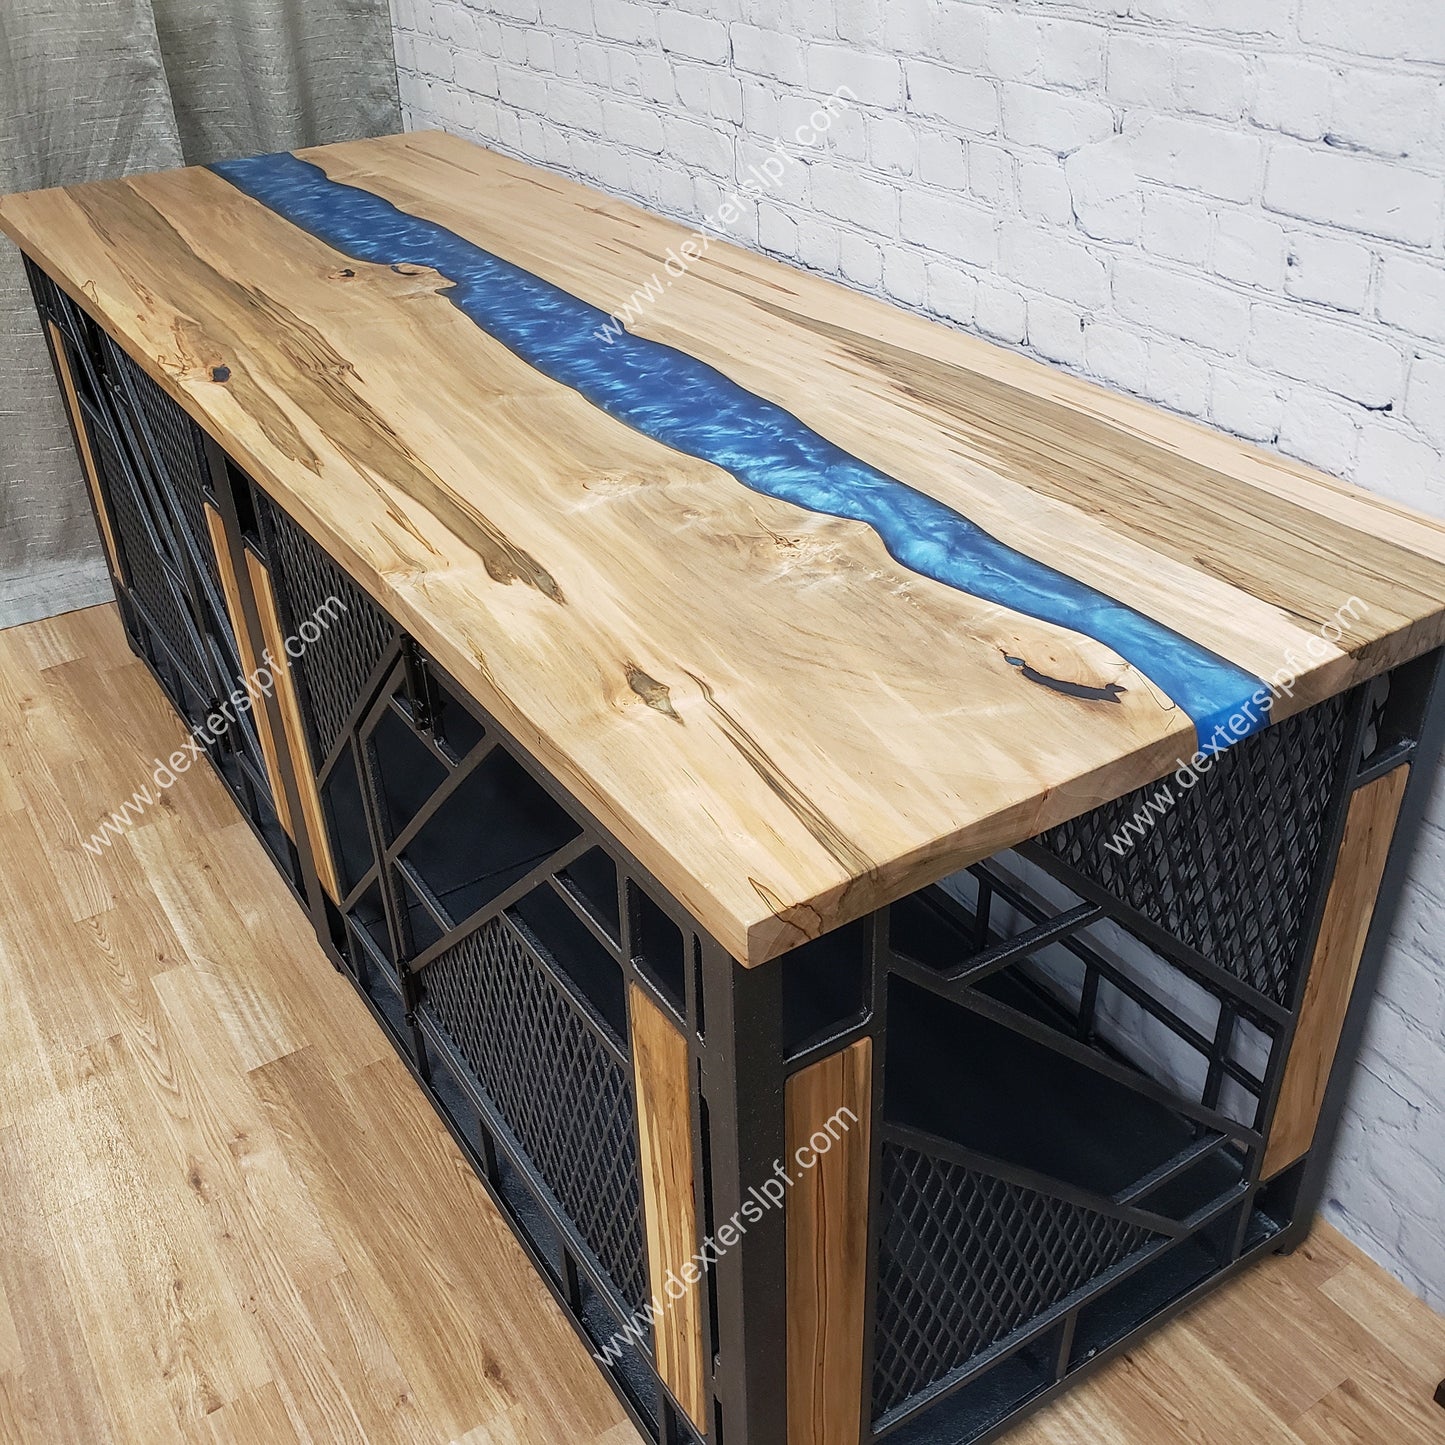 Remy X-Large Double, Dog Kennel Furniture, Modern Dog Crate, River Table, Dog Crate Table, Epoxy River Table, X-Large Dog Crate